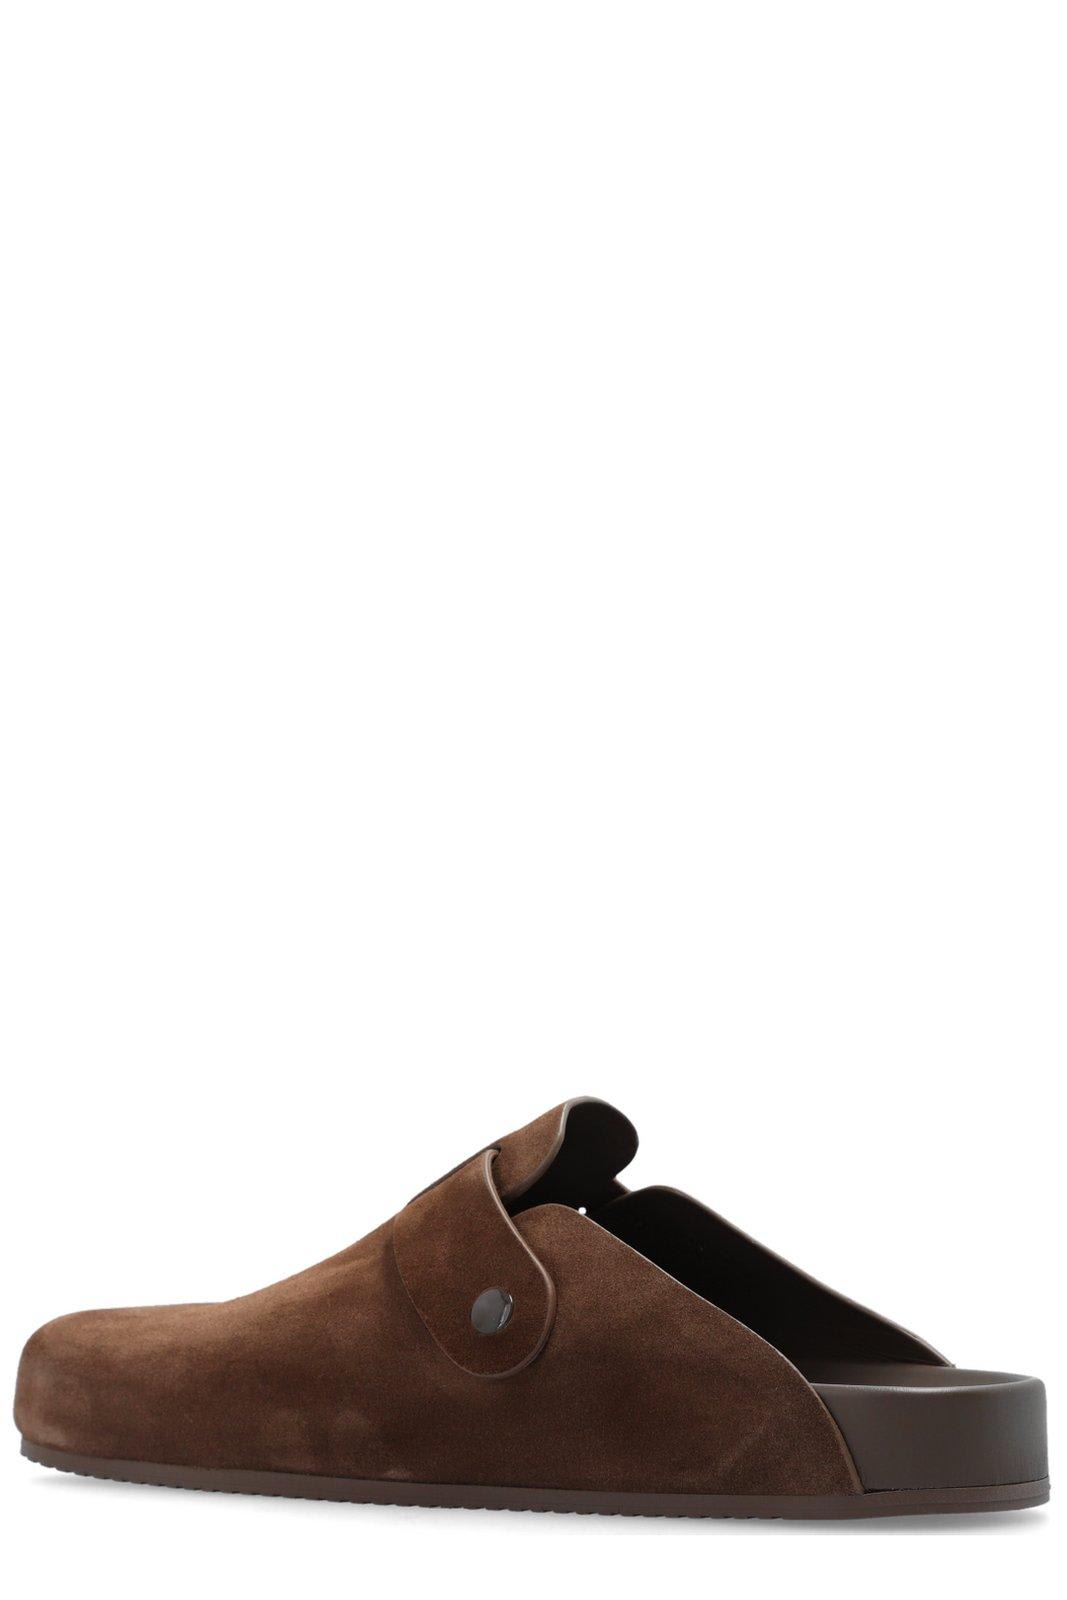 Shop Balenciaga Sunday Buckled Mules In Cold Brown